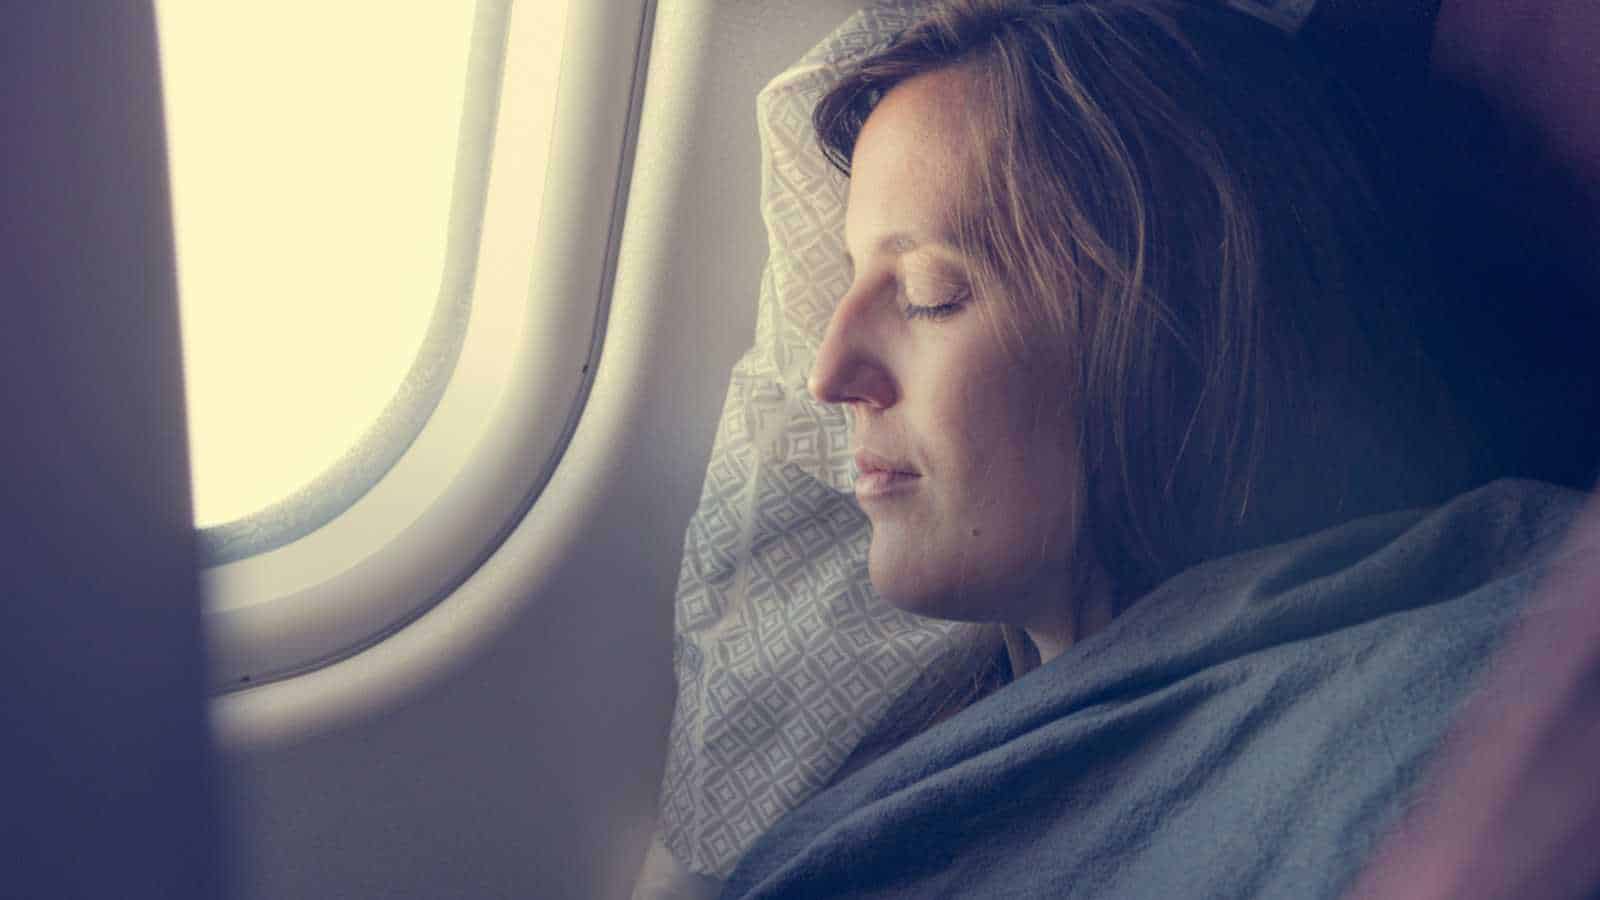 Sleeping in flight covered with blanket